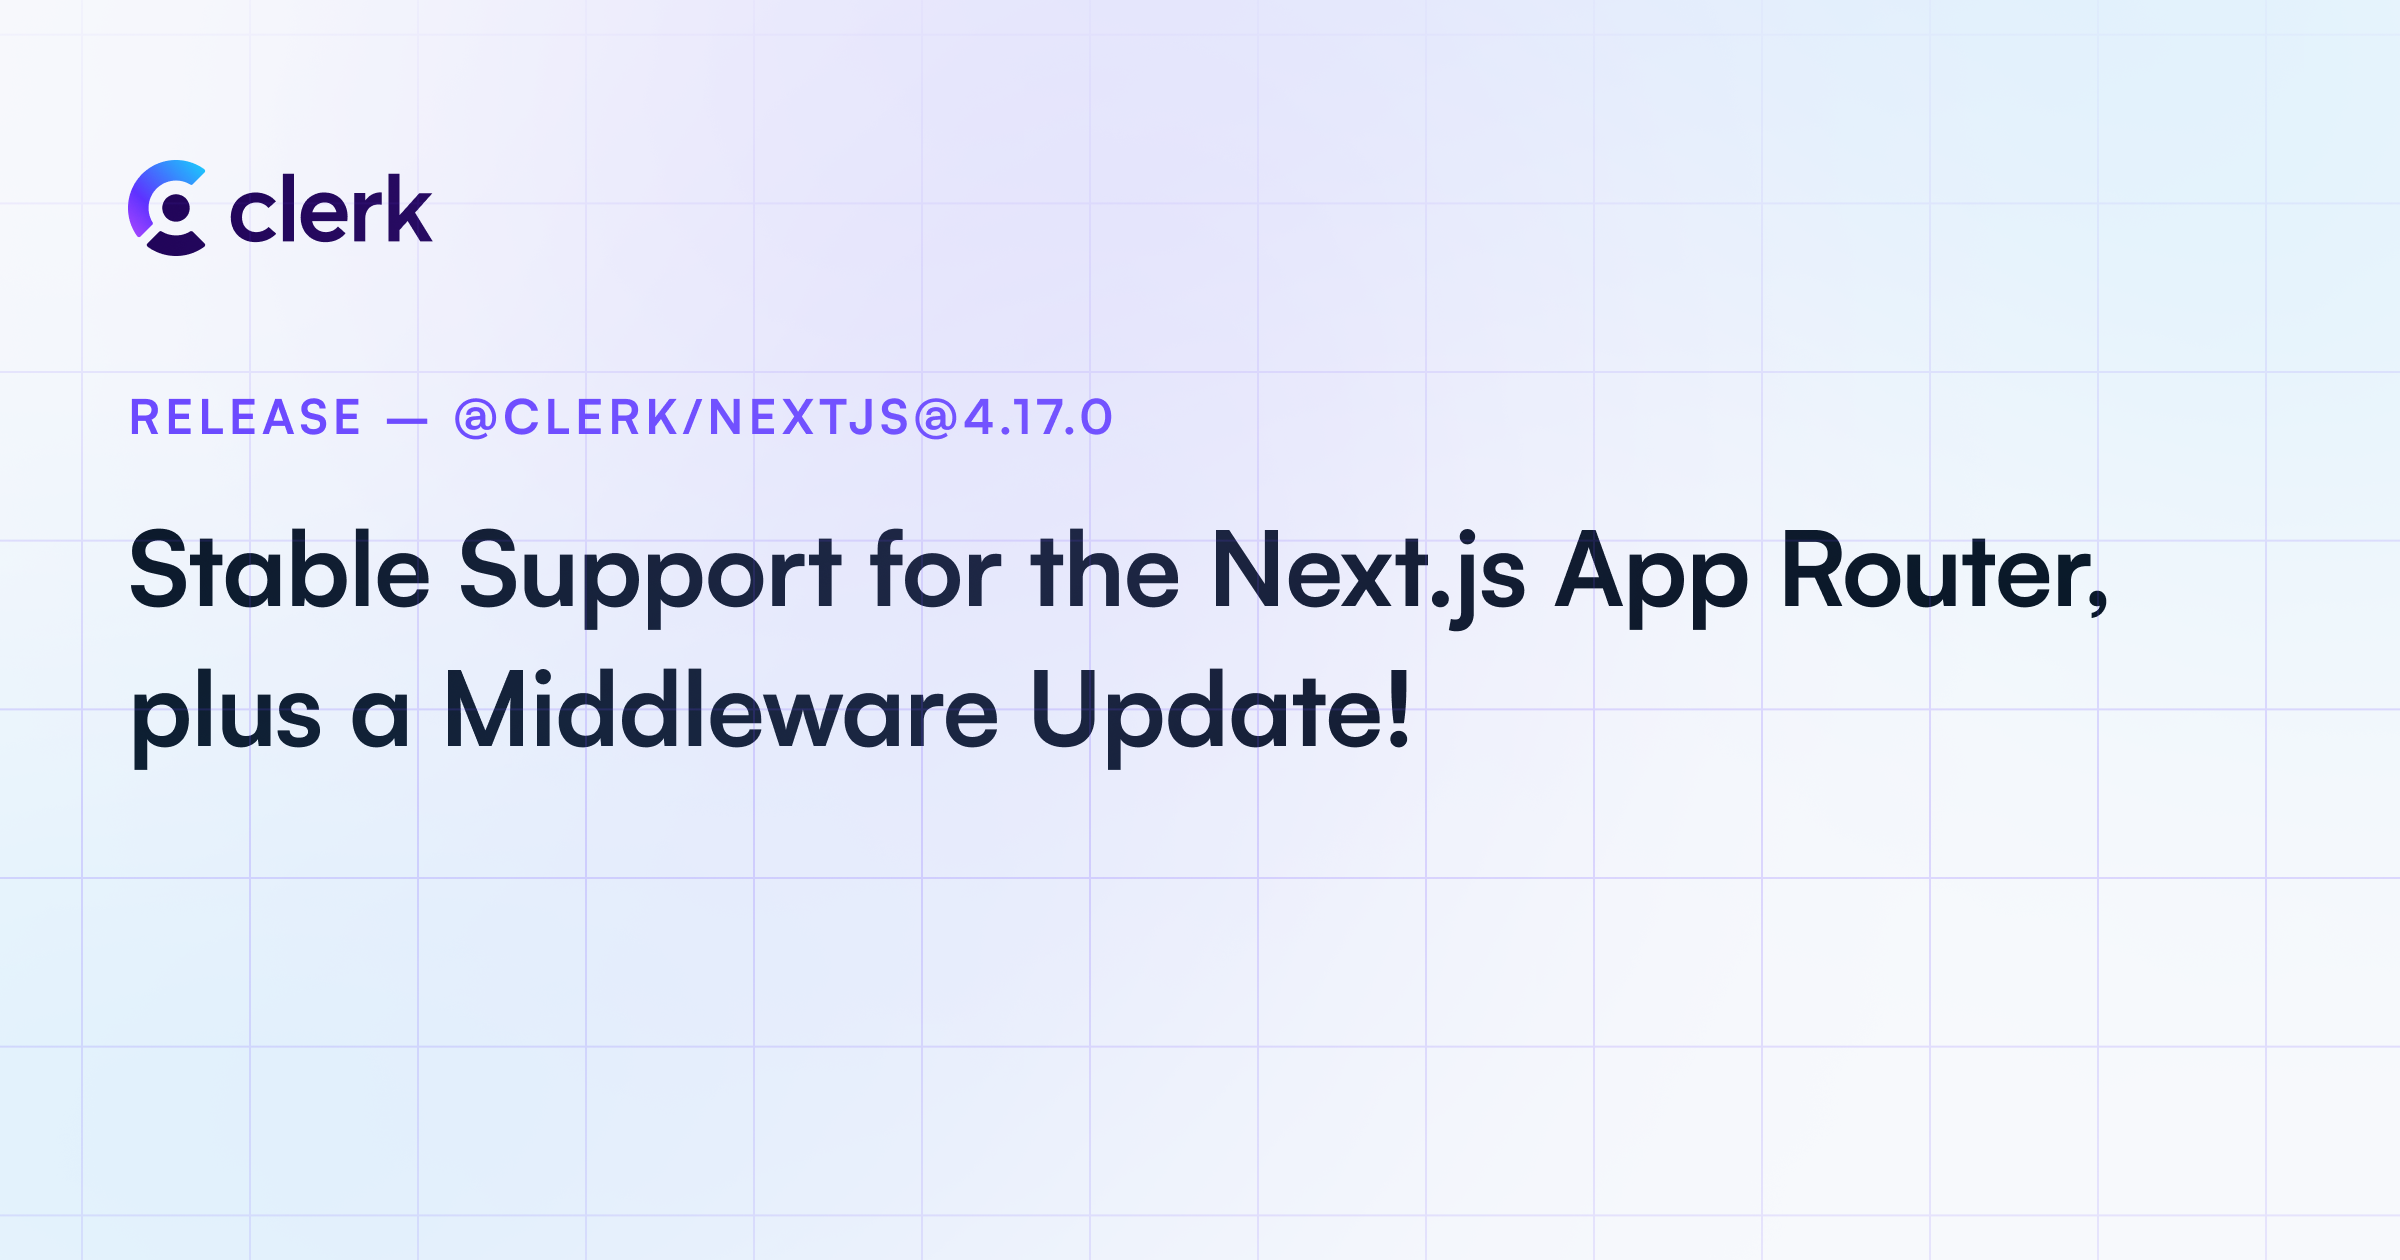 Stable Support for the Next.js App Router, plus a Middleware Update!